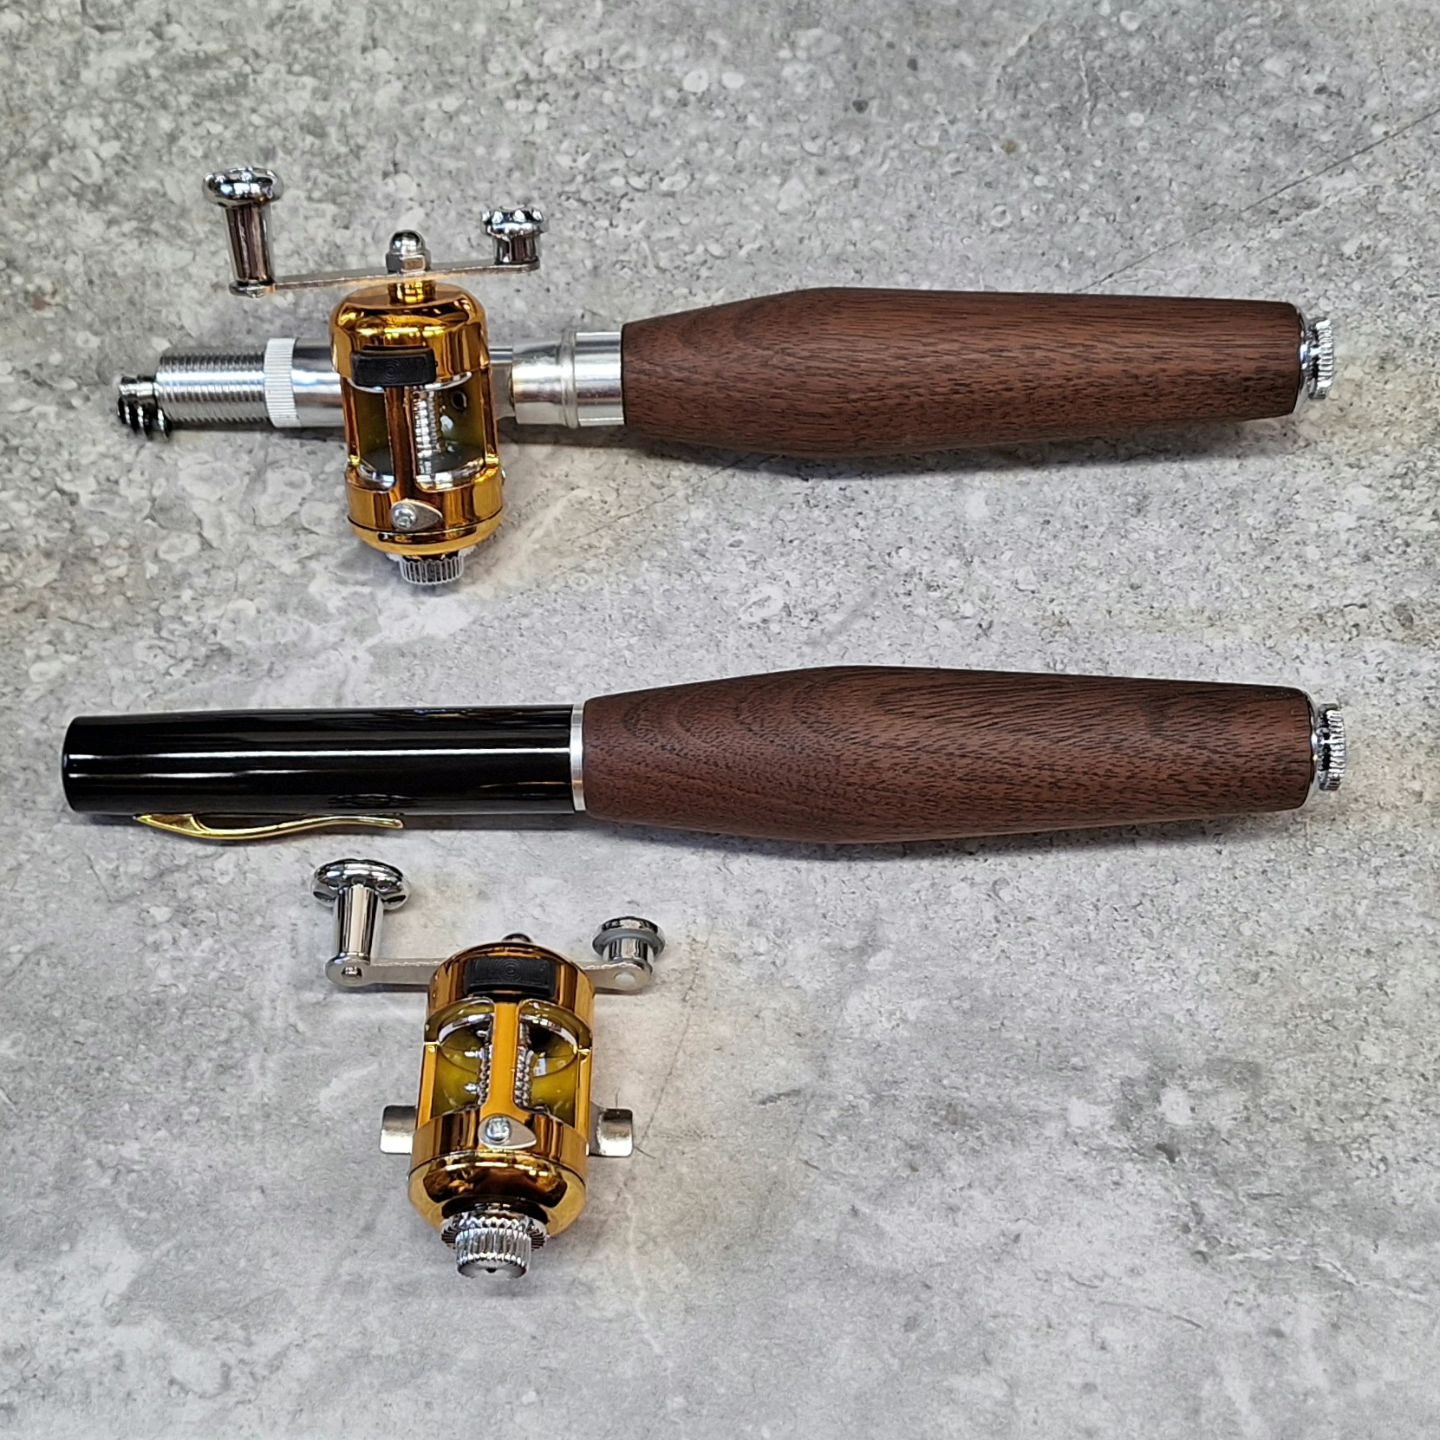 Collapsible fishing poles! I made these for my brother and mom. #fishing #fishingpole #walnut